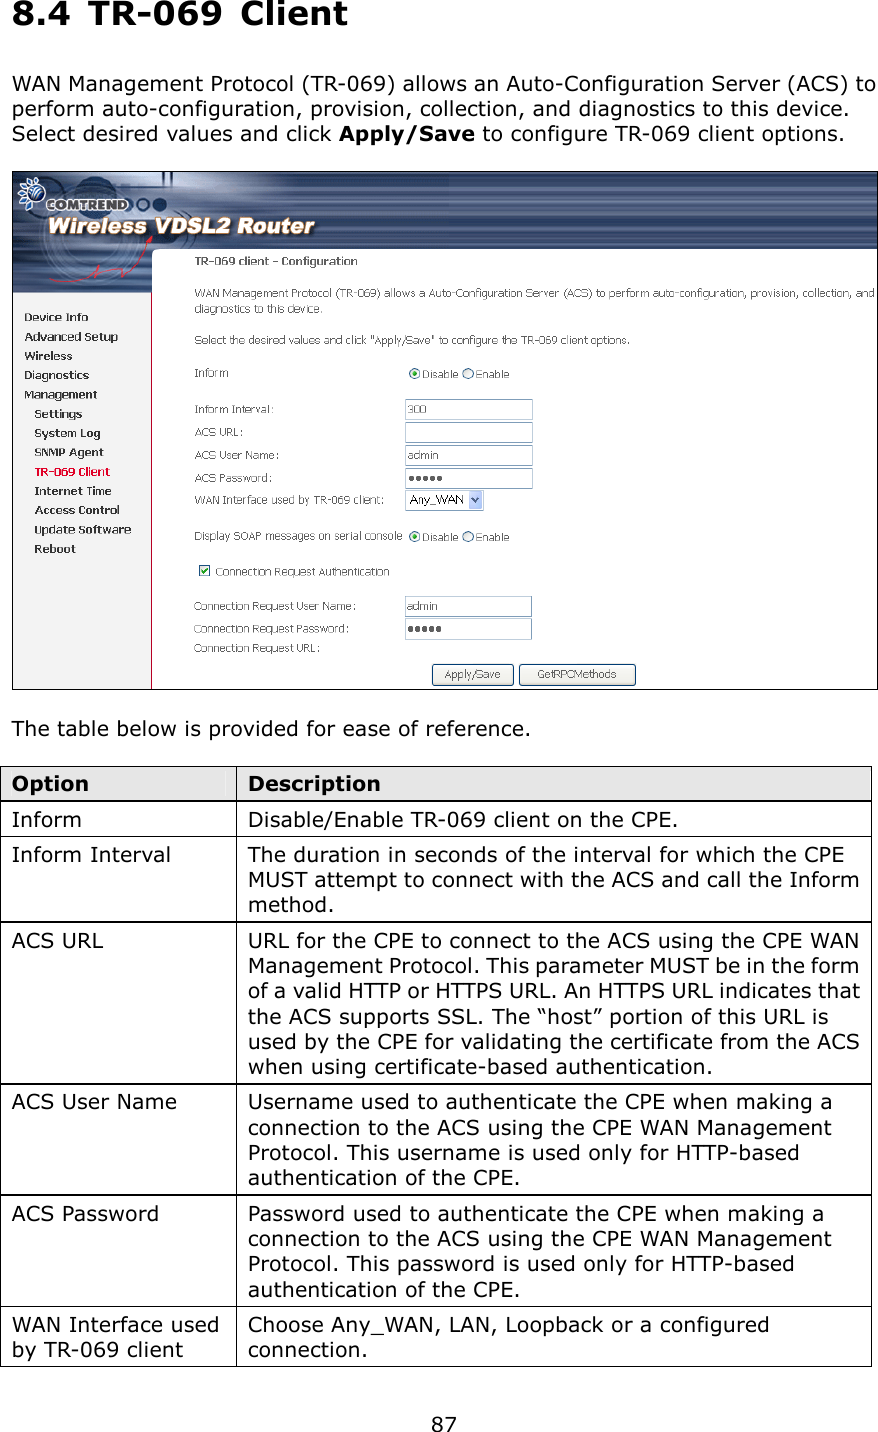   87 8.4  TR-069  Client WAN Management Protocol (TR-069) allows an Auto-Configuration Server (ACS) to perform auto-configuration, provision, collection, and diagnostics to this device.   Select desired values and click Apply/Save to configure TR-069 client options.    The table below is provided for ease of reference.  Option  Description Inform  Disable/Enable TR-069 client on the CPE. Inform Interval  The duration in seconds of the interval for which the CPE MUST attempt to connect with the ACS and call the Inform method. ACS URL  URL for the CPE to connect to the ACS using the CPE WAN Management Protocol. This parameter MUST be in the form of a valid HTTP or HTTPS URL. An HTTPS URL indicates that the ACS supports SSL. The “host” portion of this URL is used by the CPE for validating the certificate from the ACS when using certificate-based authentication. ACS User Name  Username used to authenticate the CPE when making a connection to the ACS using the CPE WAN Management Protocol. This username is used only for HTTP-based authentication of the CPE. ACS Password  Password used to authenticate the CPE when making a connection to the ACS using the CPE WAN Management Protocol. This password is used only for HTTP-based authentication of the CPE. WAN Interface used by TR-069 client Choose Any_WAN, LAN, Loopback or a configured connection. 